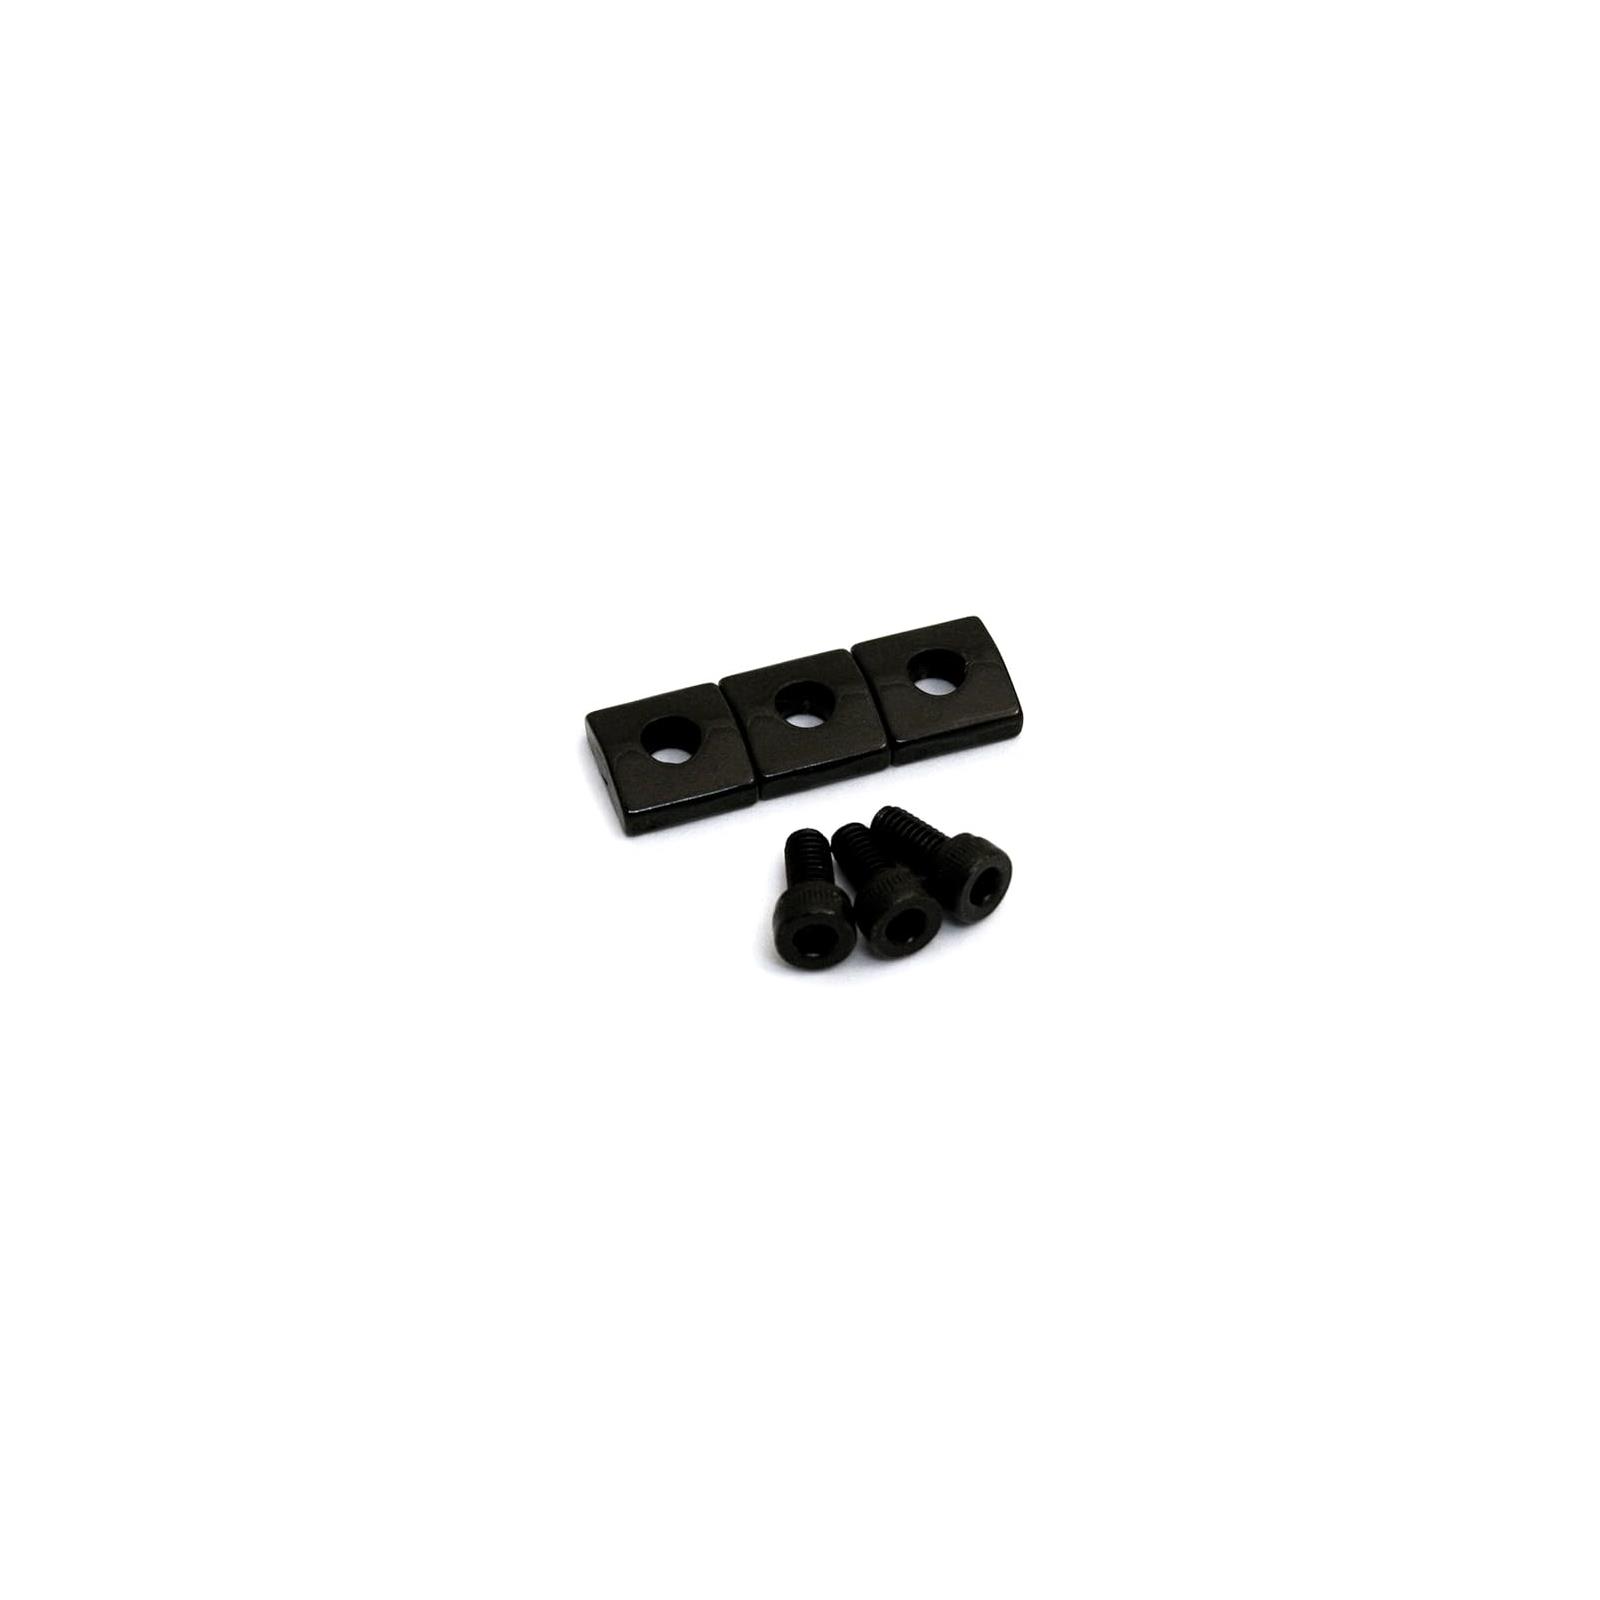 All Parts Floyd Rose Nut Clamps Black